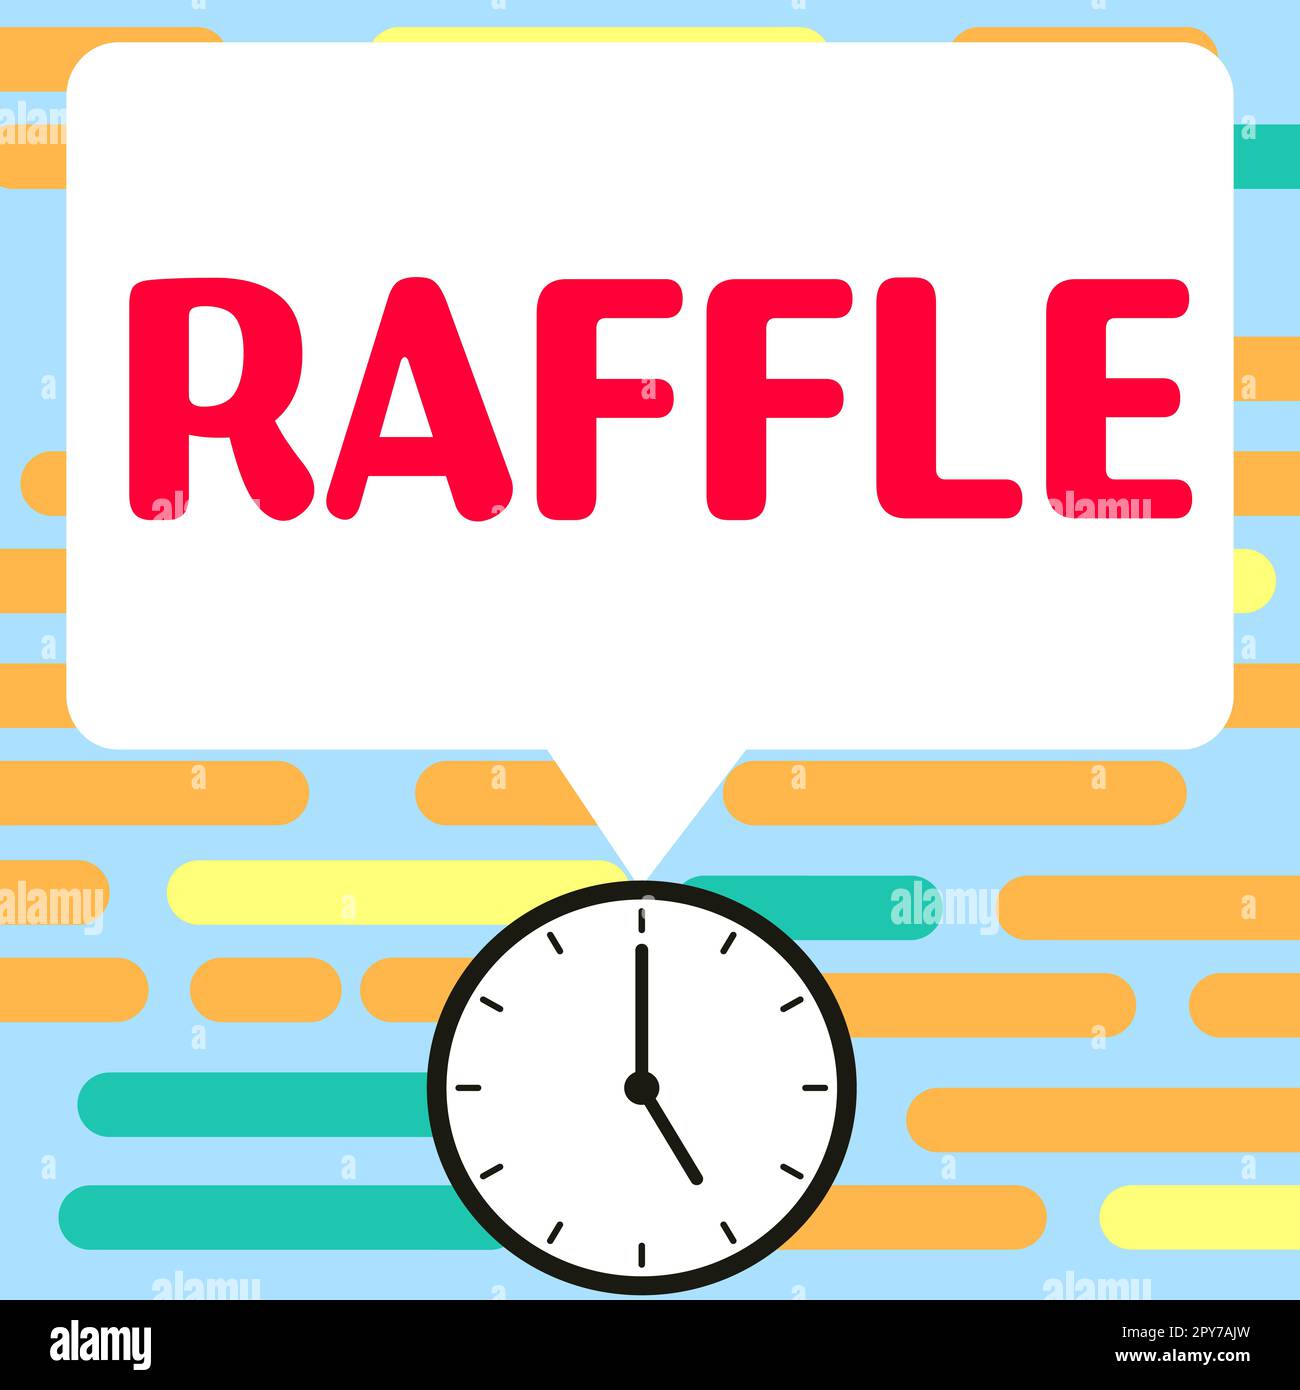 Sign displaying Raffle. Business idea means of raising money by selling numbered tickets offer as prize Stock Photo